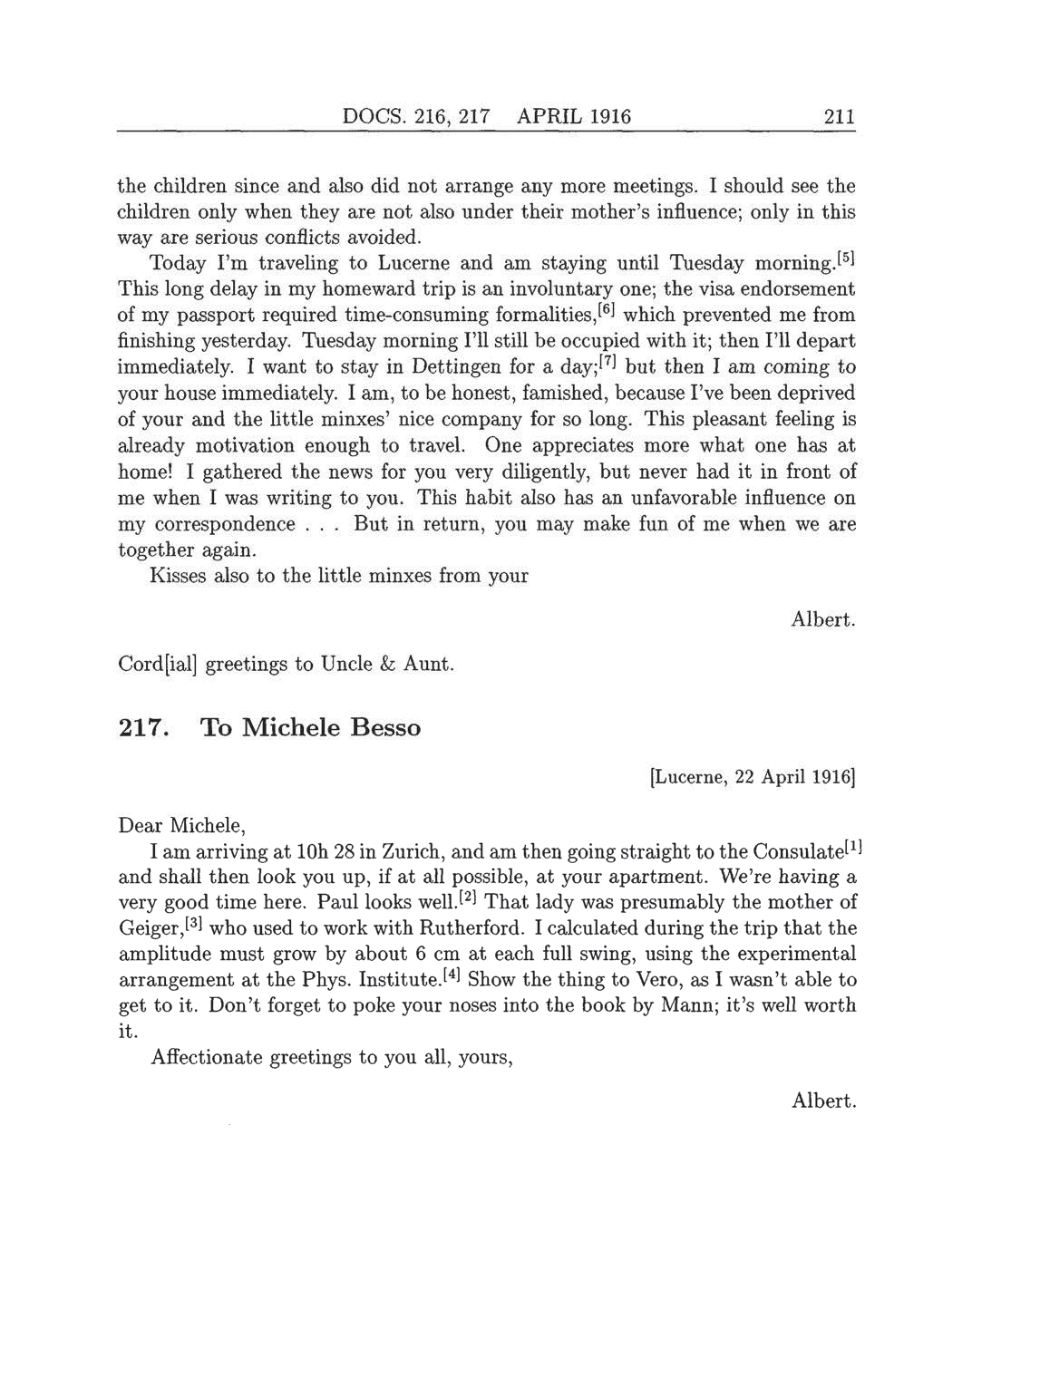 Volume 8: The Berlin Years: Correspondence, 1914-1918 (English translation supplement) page 211